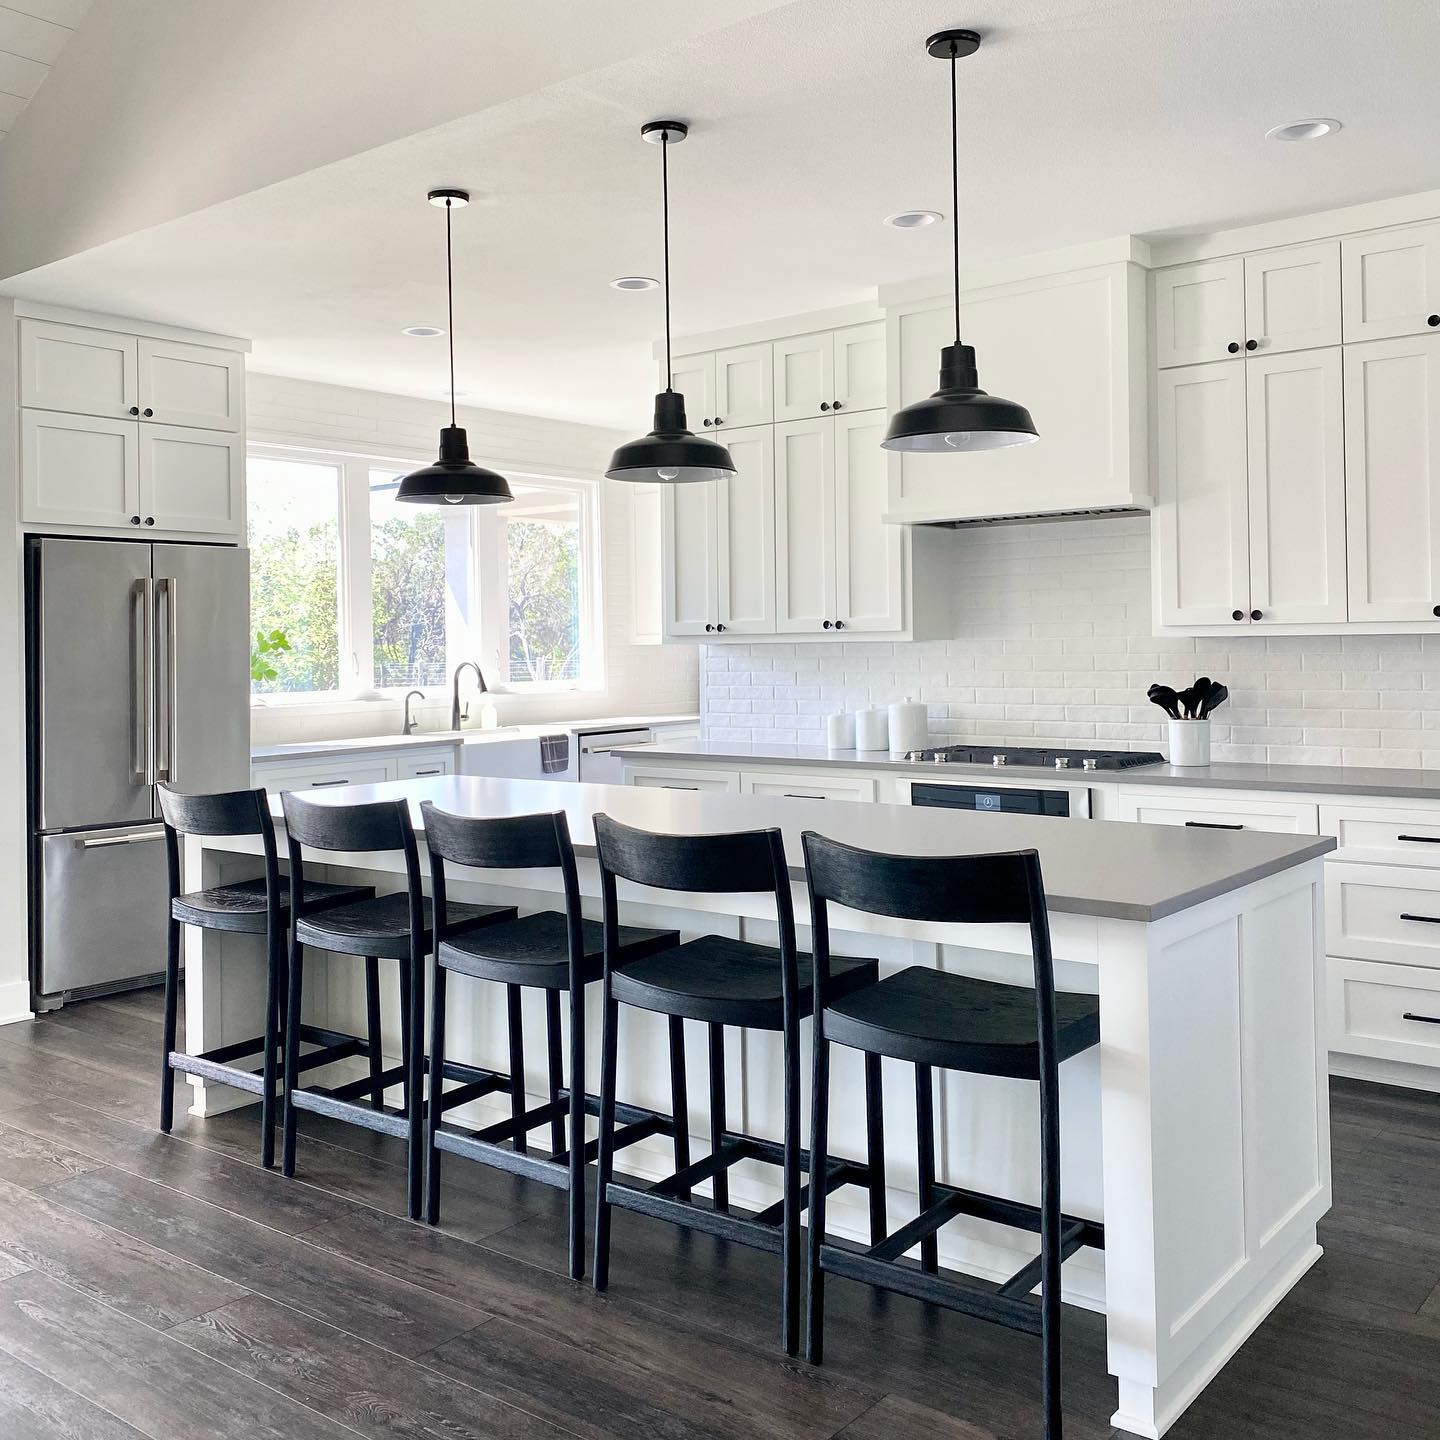 kitchen colors with white cabinets